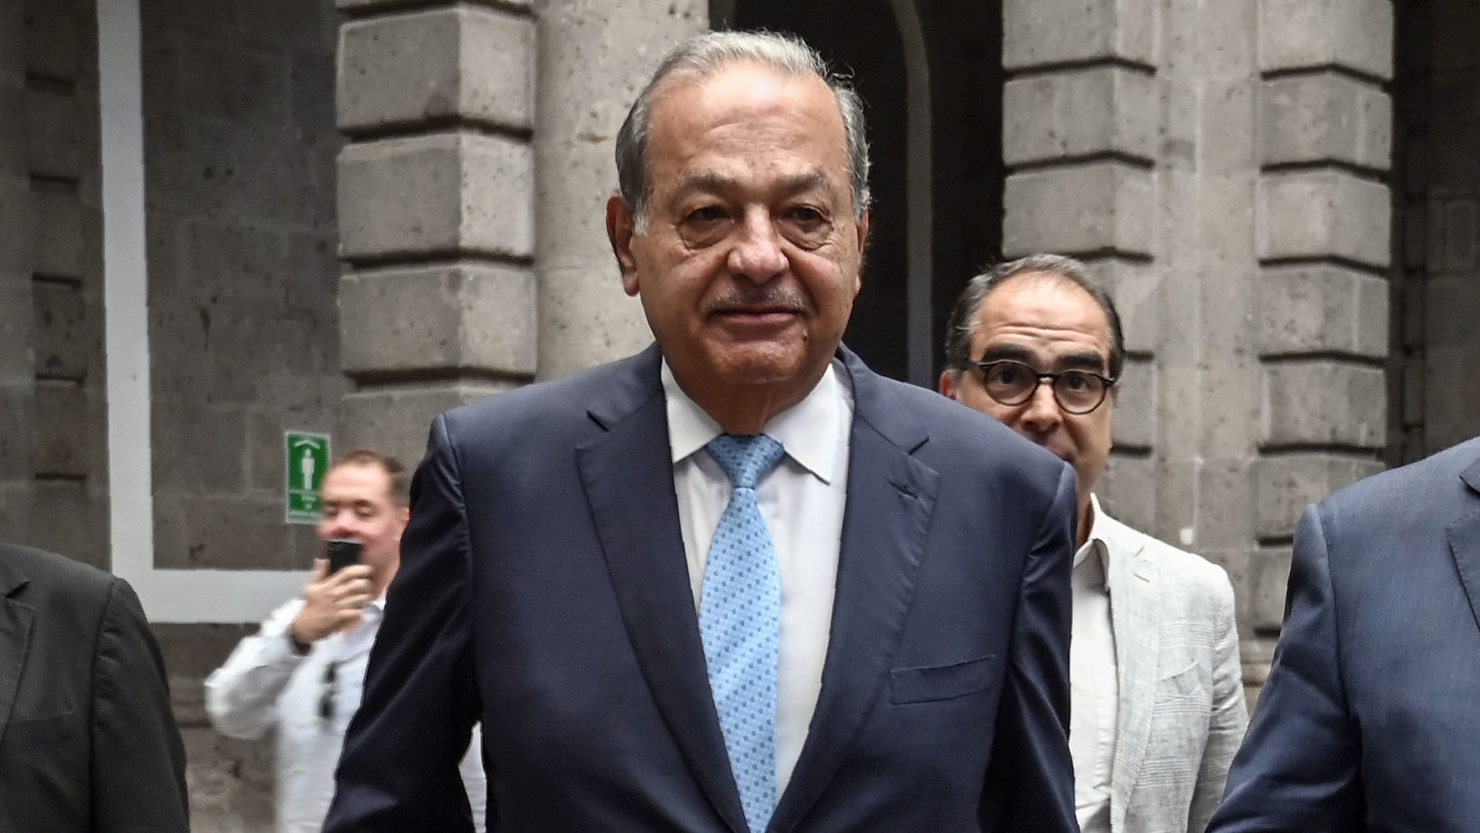 Mexican tycoon Carlos Slim arrives with members of his crew to the VII Symposium of the Historic Center at the Miner's Palace (Palacio de Mineria) in Mexico City, on May 23, 2019. (ALFREDO ESTRELLA/AFP via Getty Images)